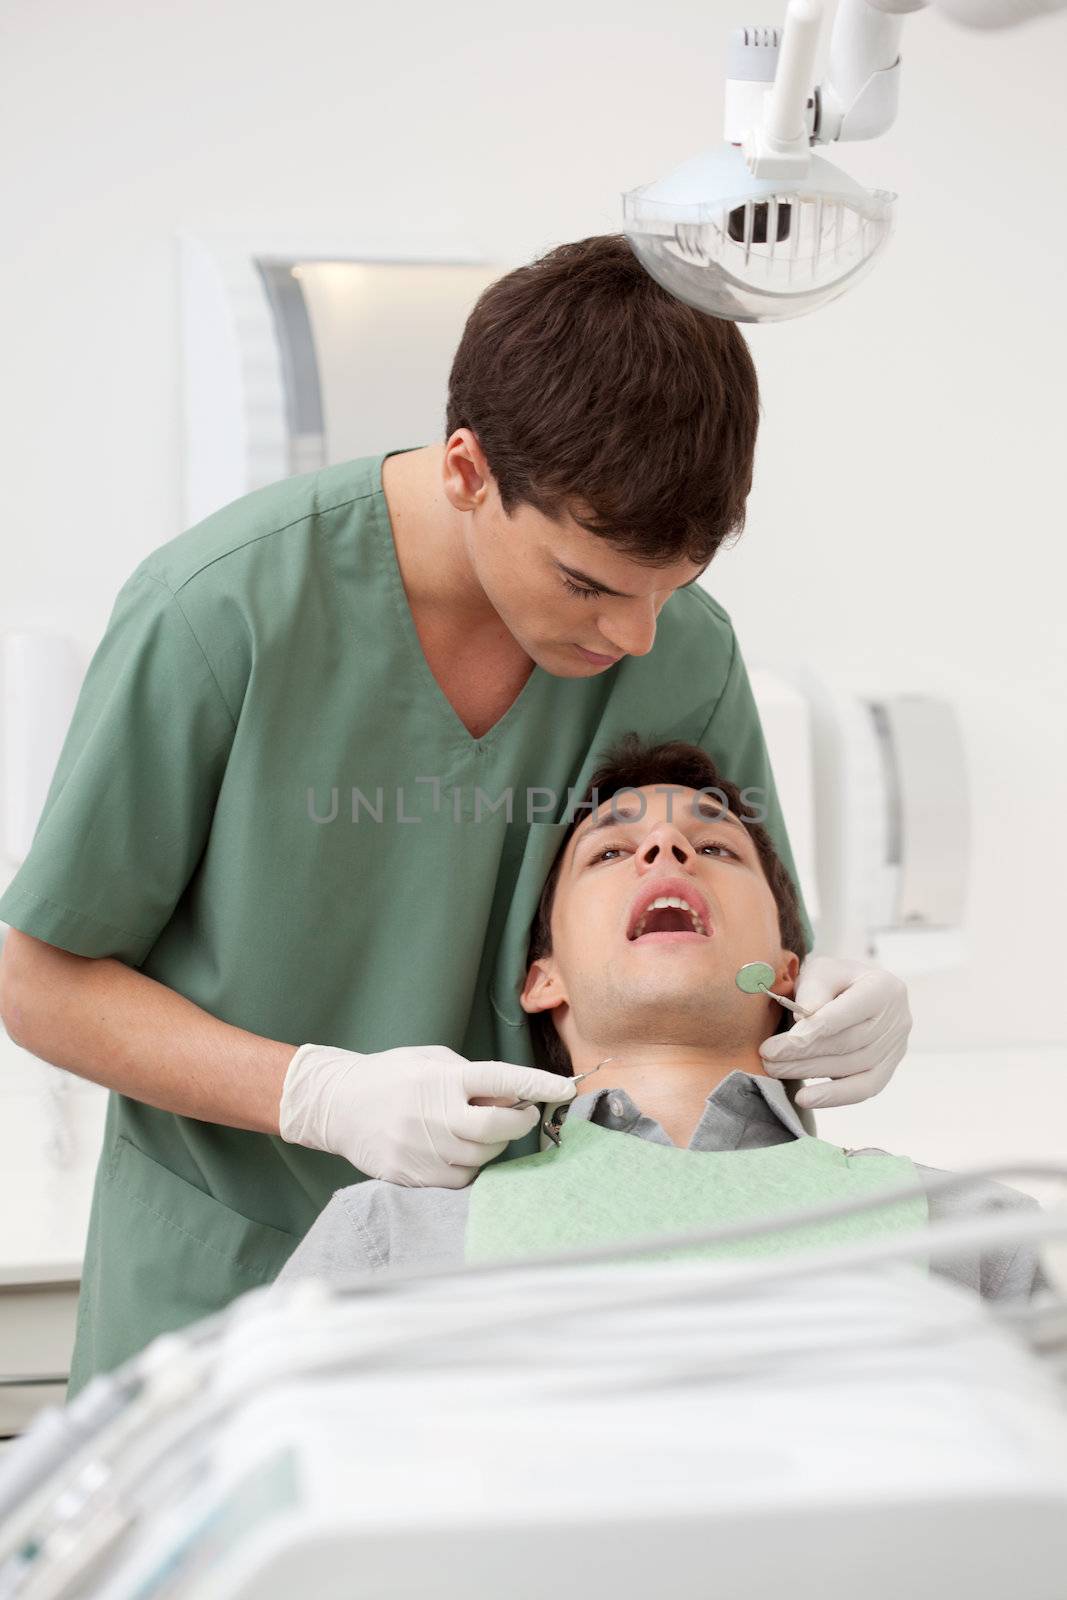 Dentist Appointment by leaf